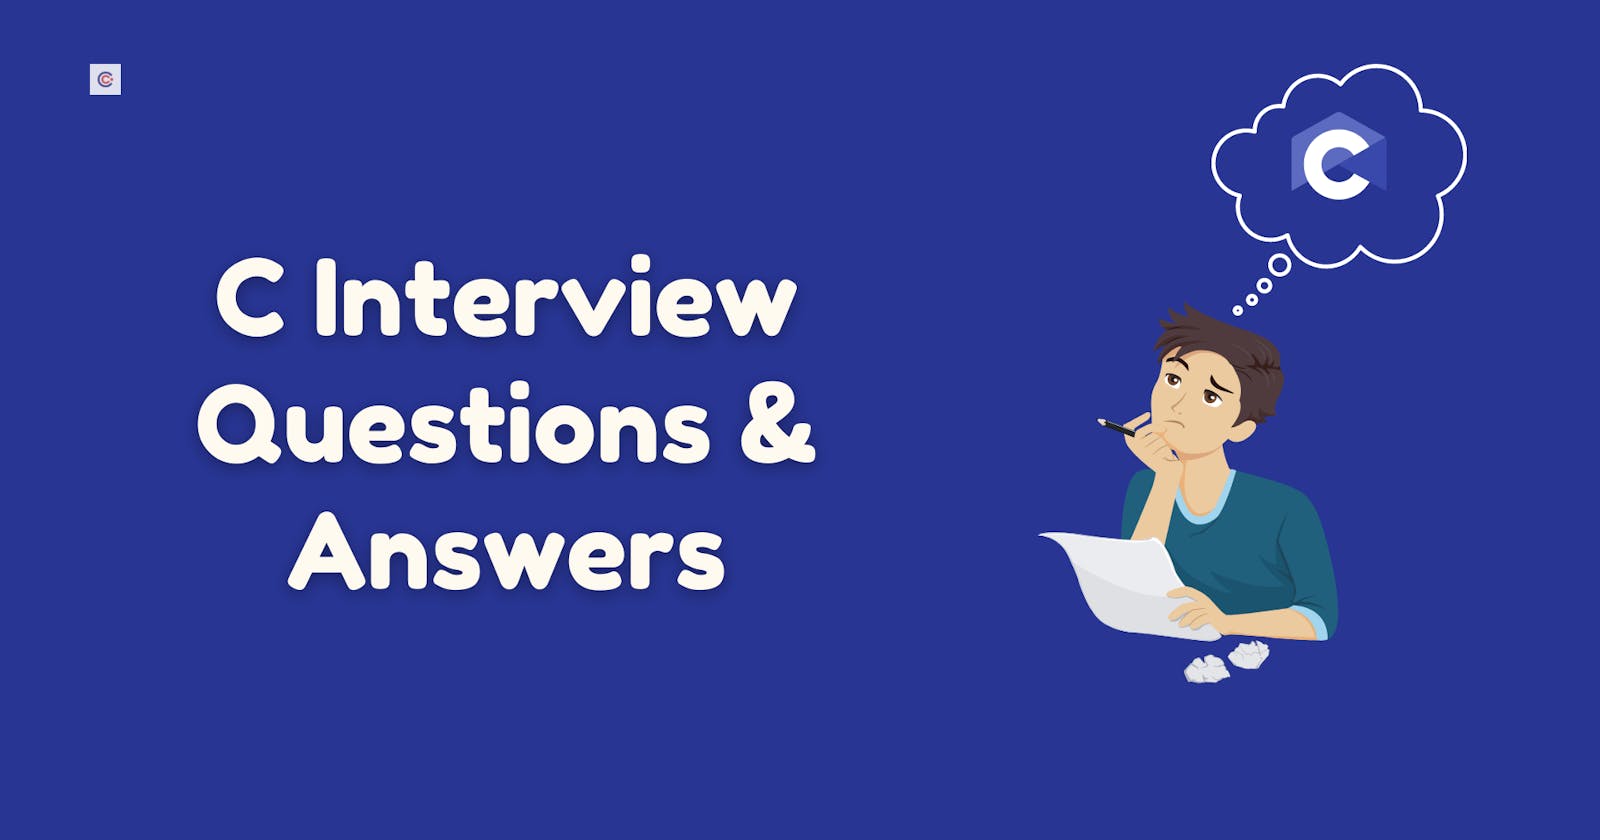 50 Frequently Asked C Interview Questions For C Programming in 2021